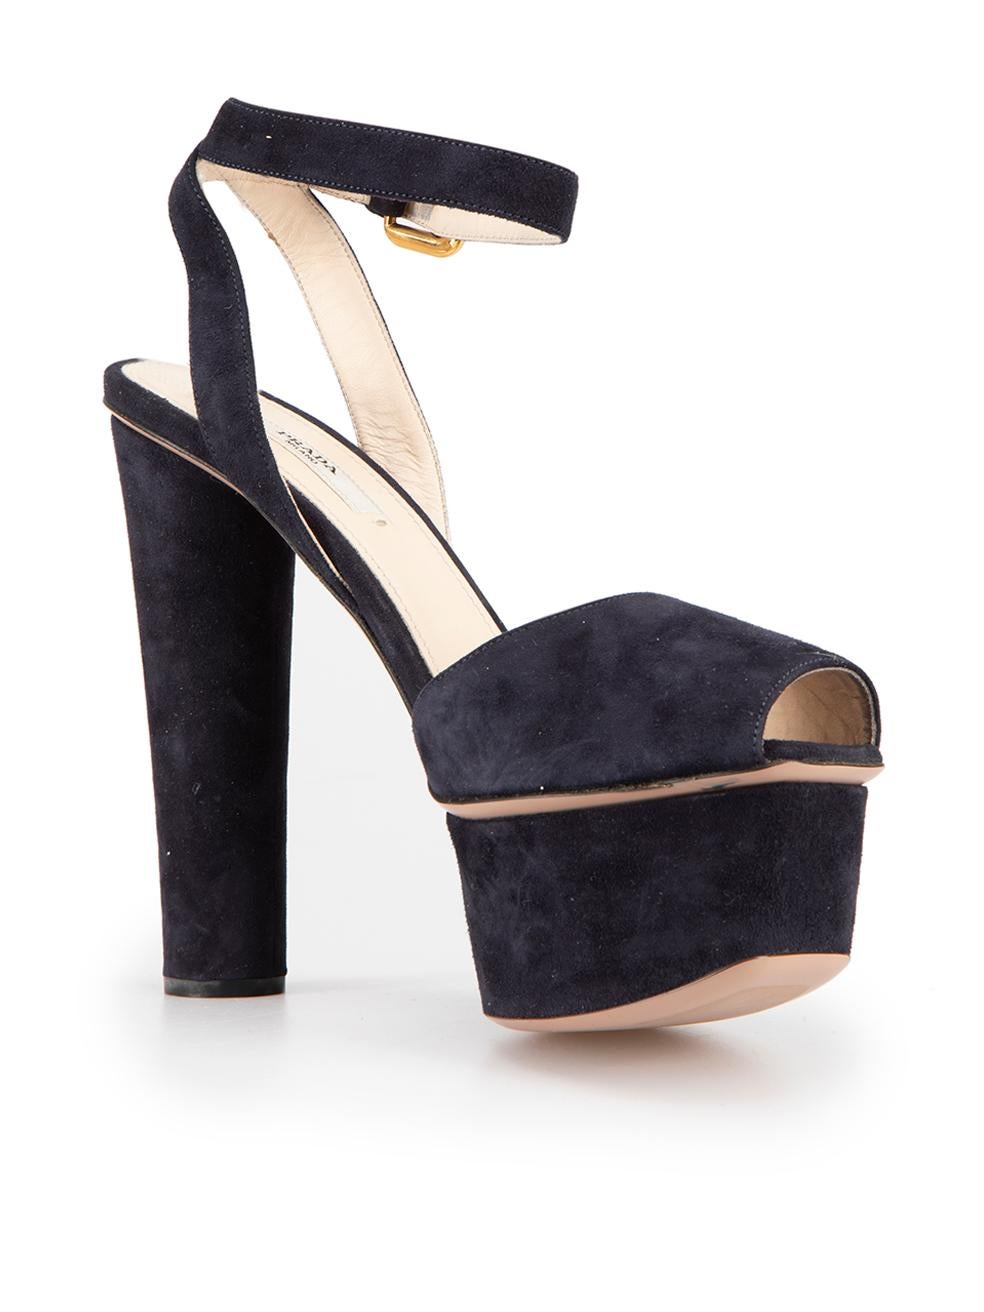 CONDITION is Very good. Hardly any visible wear to sandals is evident on this used Prada designer resale item. Original box included.



Details


Navy

Suede

Sandals

Peep toe

Platform high heel

Ankle buckled strap closure





Made in